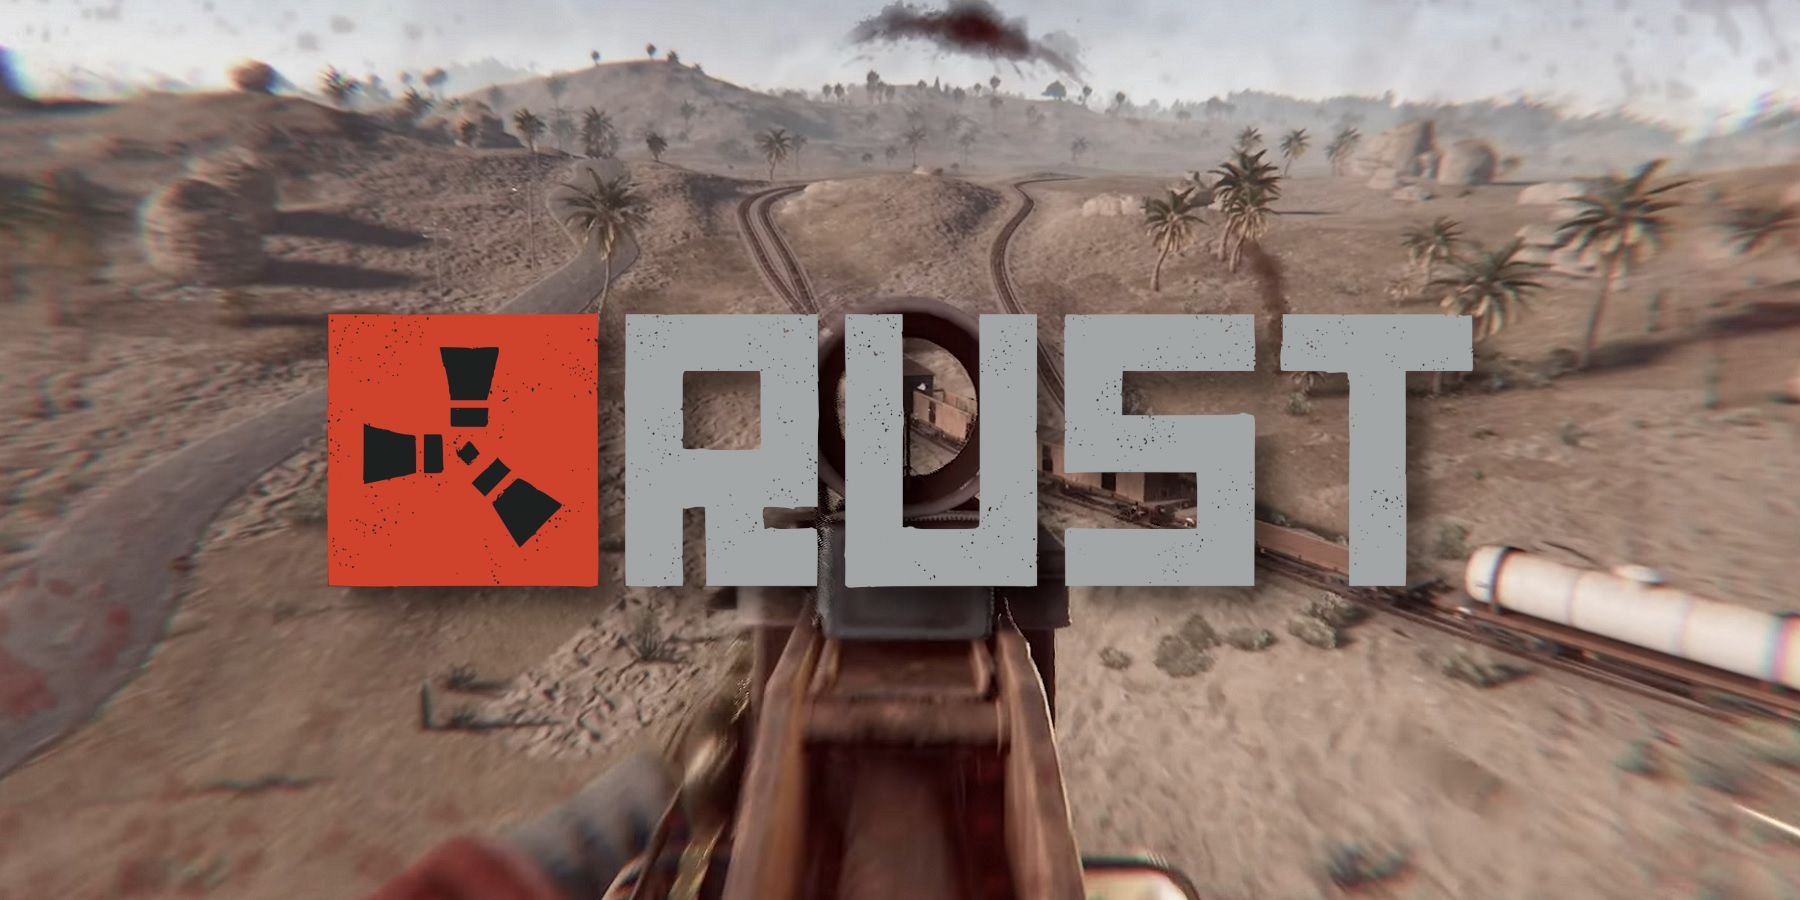 Screenshot from Rust showing the player shooting a game, with the game's logo in the middle.